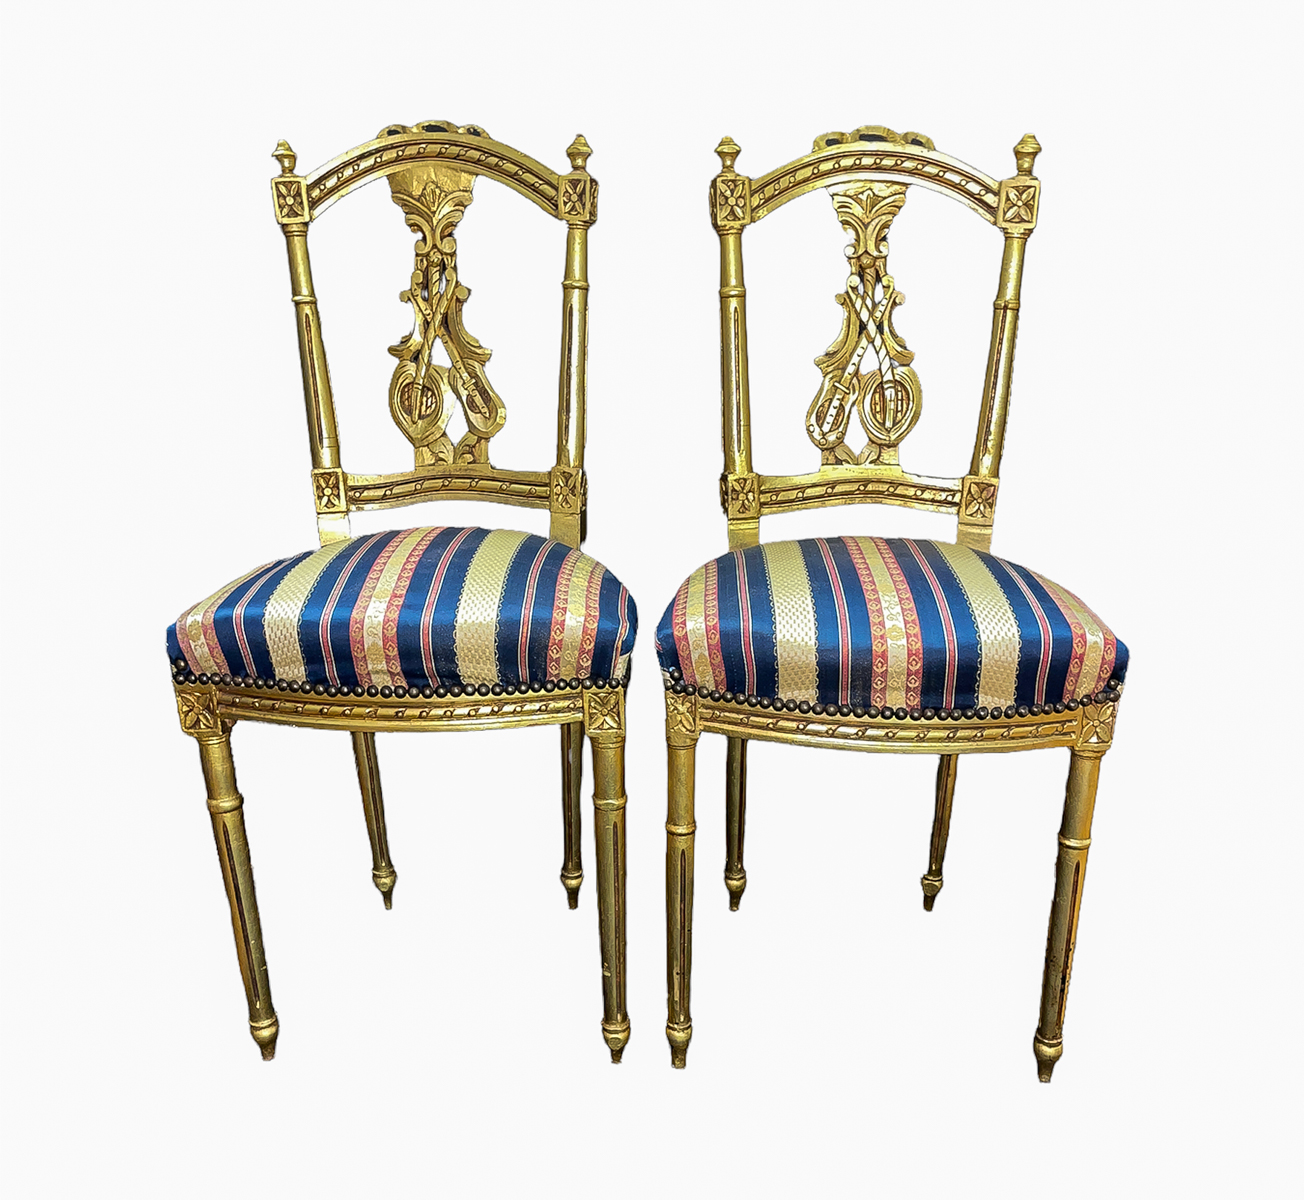 PAIR OF CARVED & GILT ITALIAN CHAIRS: